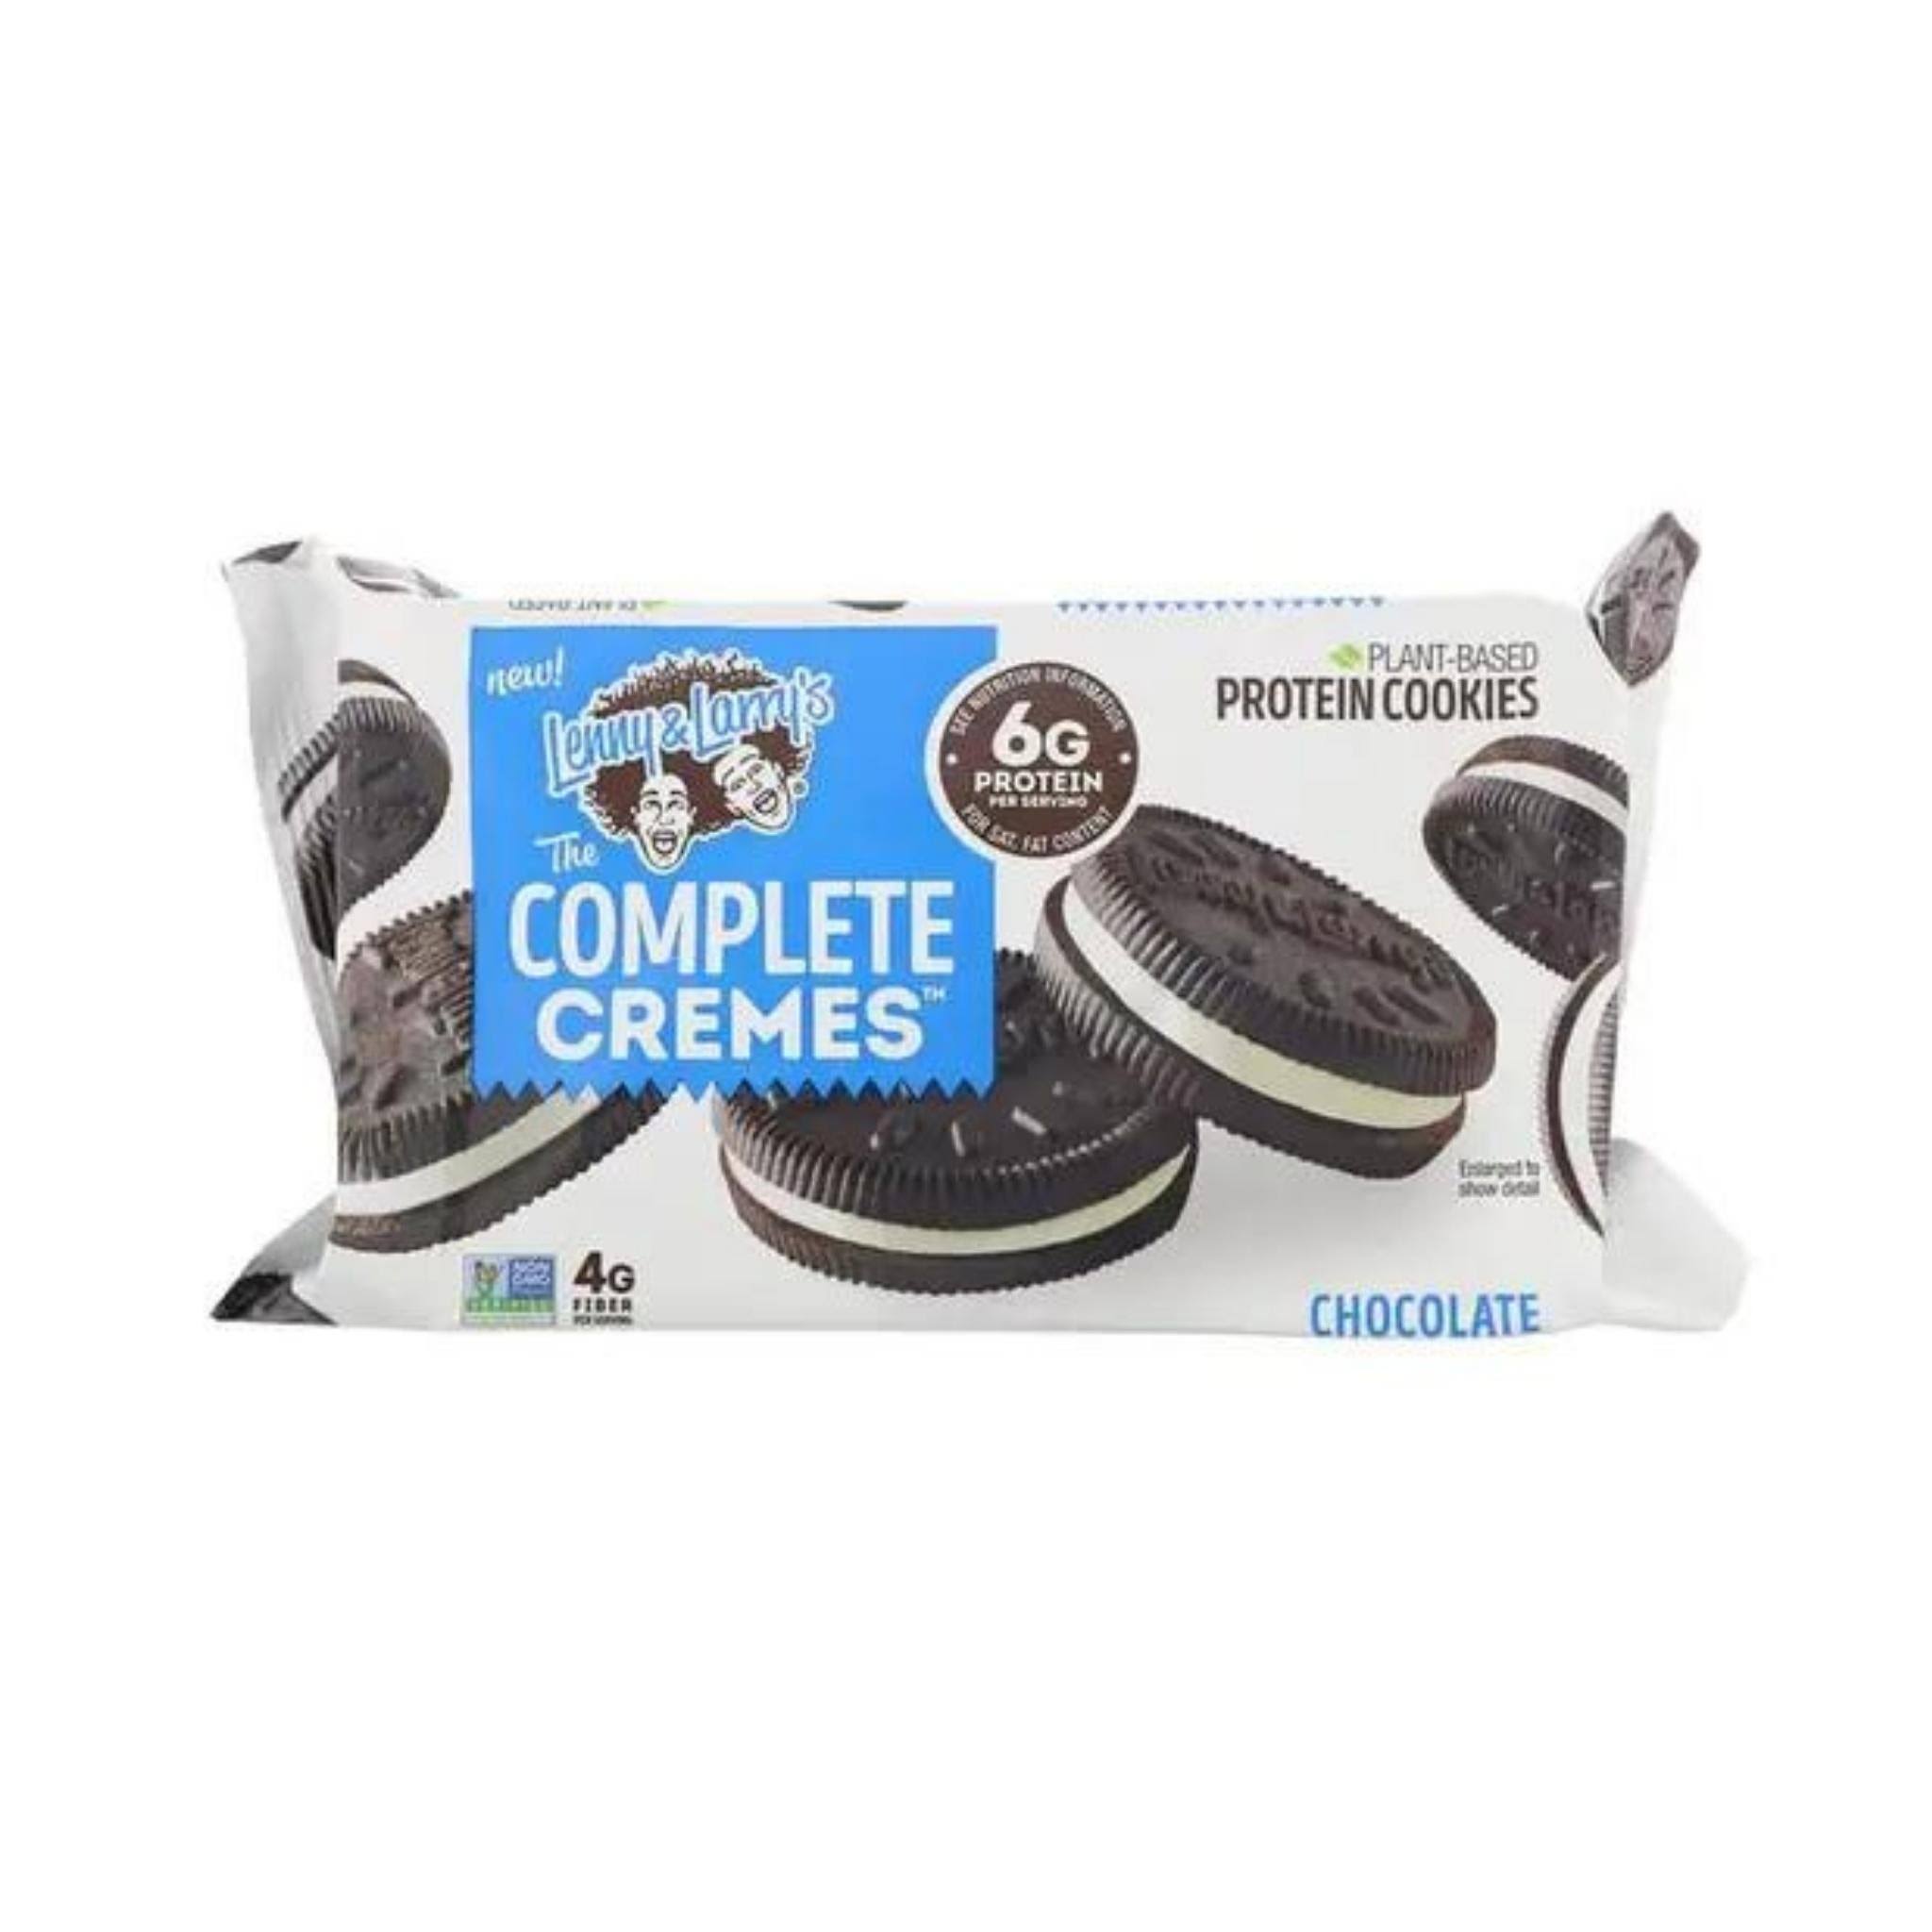 Lenny & Larry's The Complete Cremes Cookies, Plant-Based Proteins, Chocolate - 6 cookies, 2.86 oz